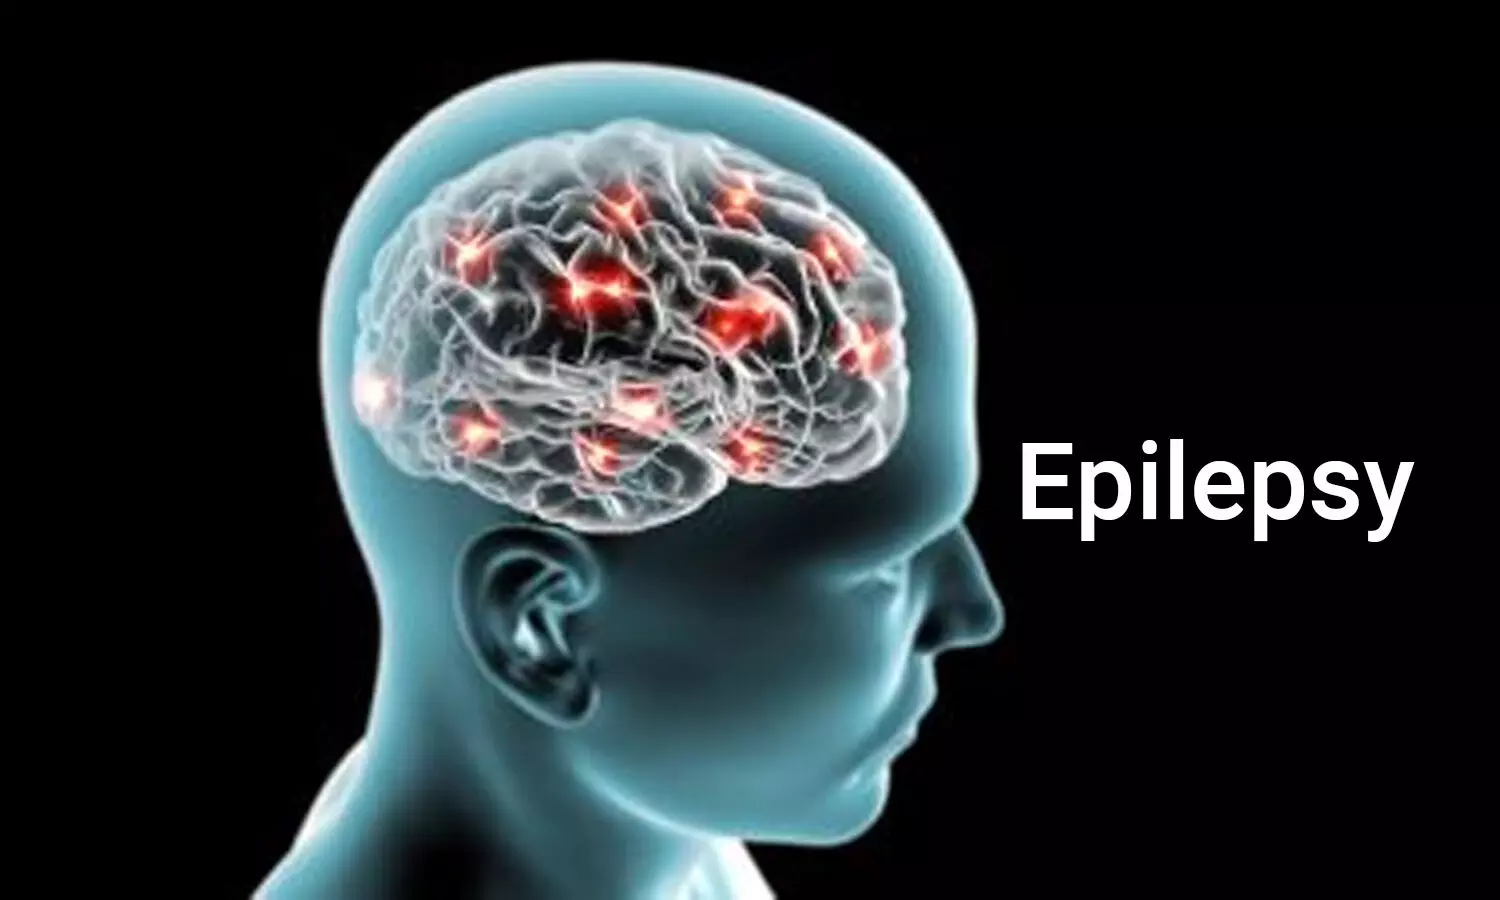 Hypertension may double risk of developing epilepsy